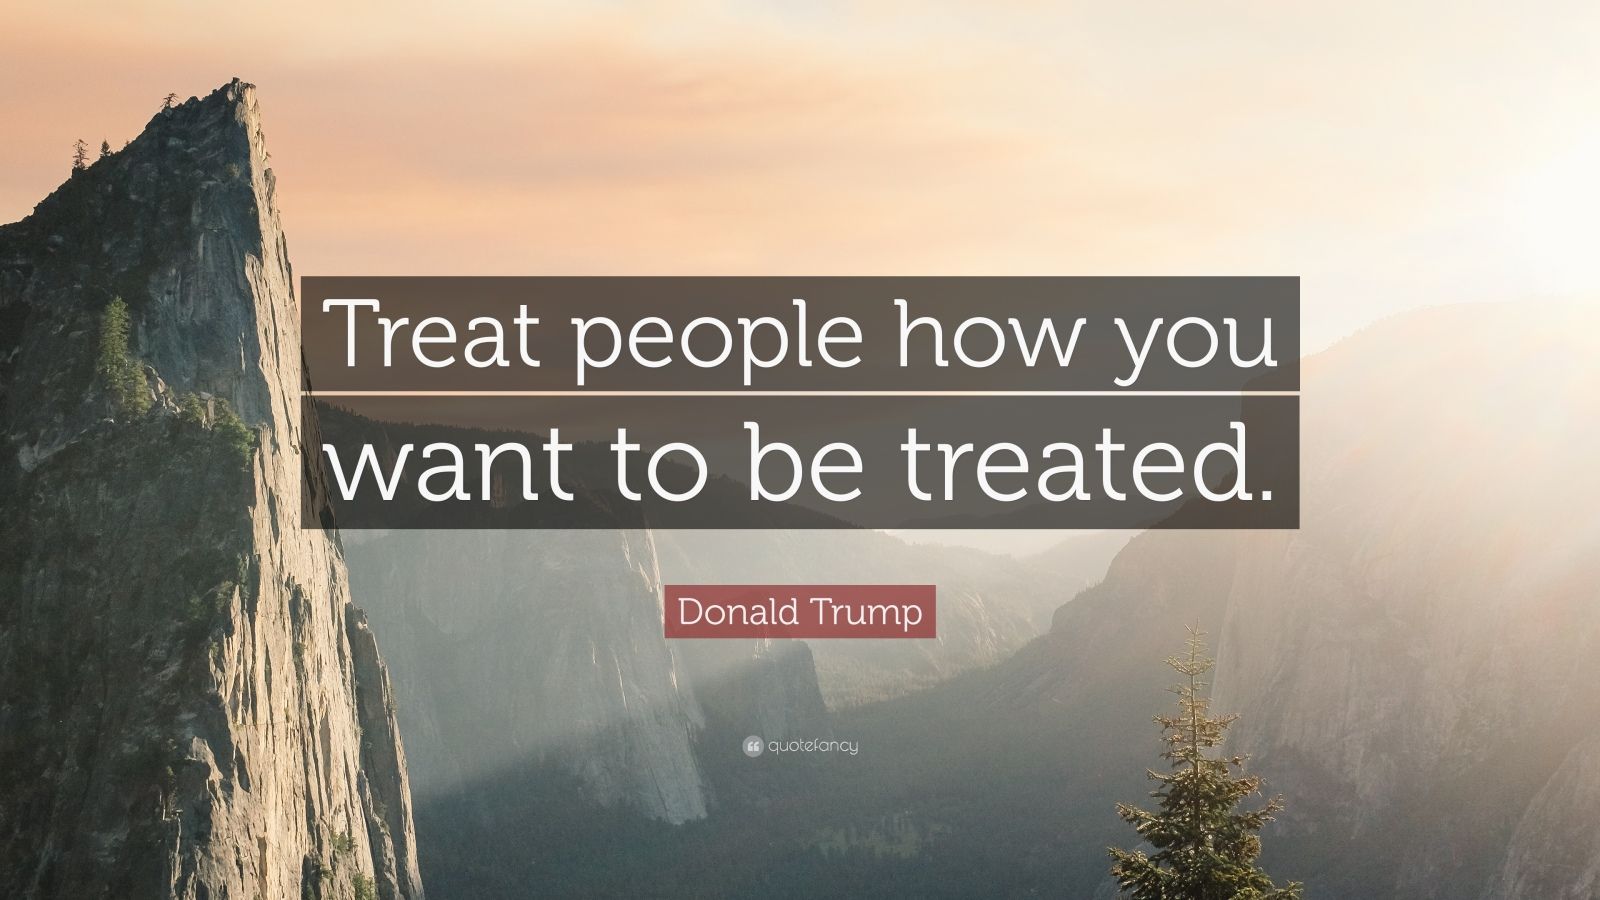 Donald Trump Quote “Treat people how you want to be treated.”